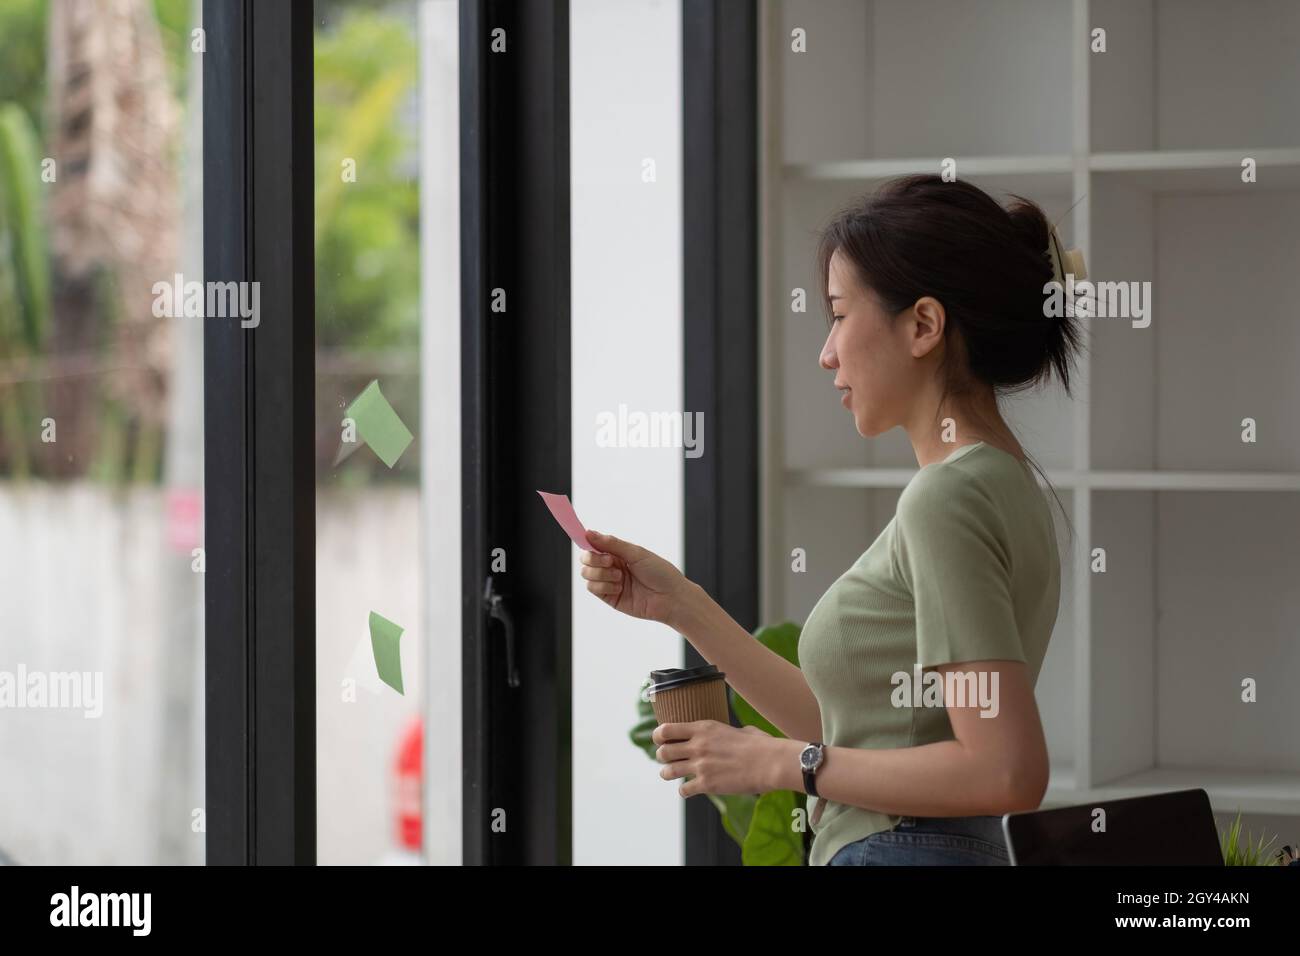 Creative business asian woman reading sticky notes on glass wall at office. Stock Photo